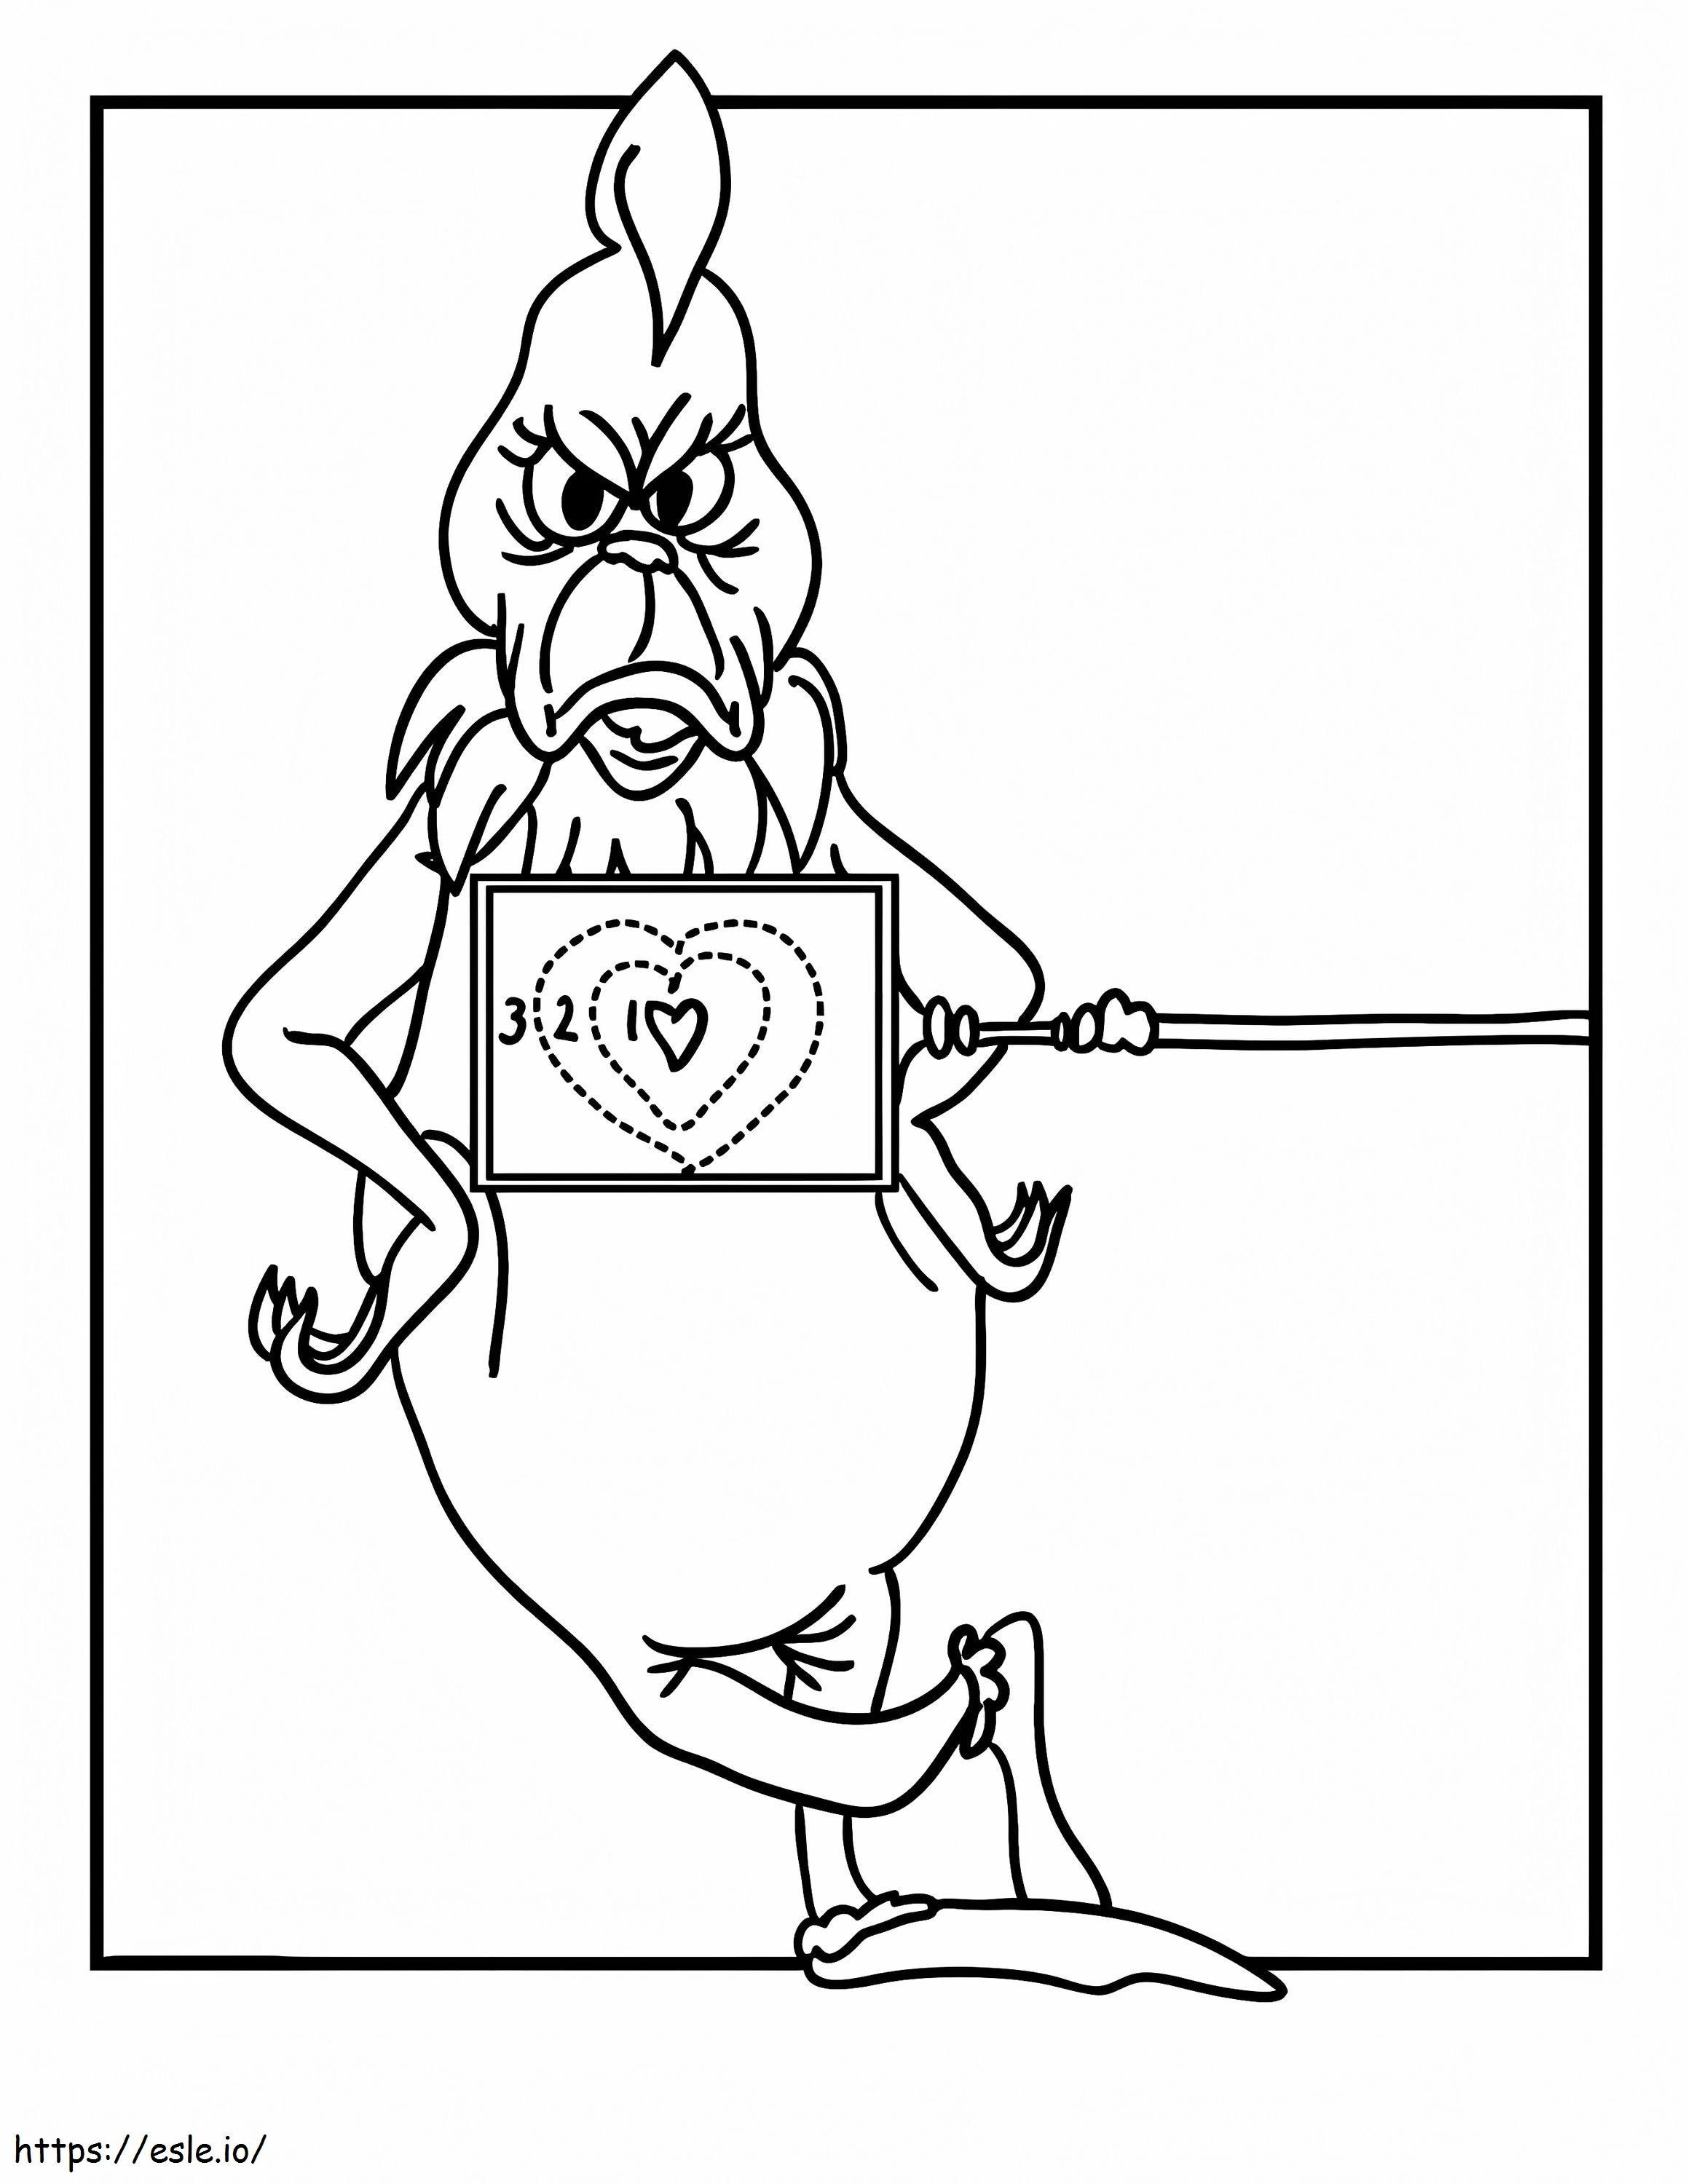 1571964366 Grinch The Grinch Elegant How The Grinch Stole Christmas Grinch coloring page